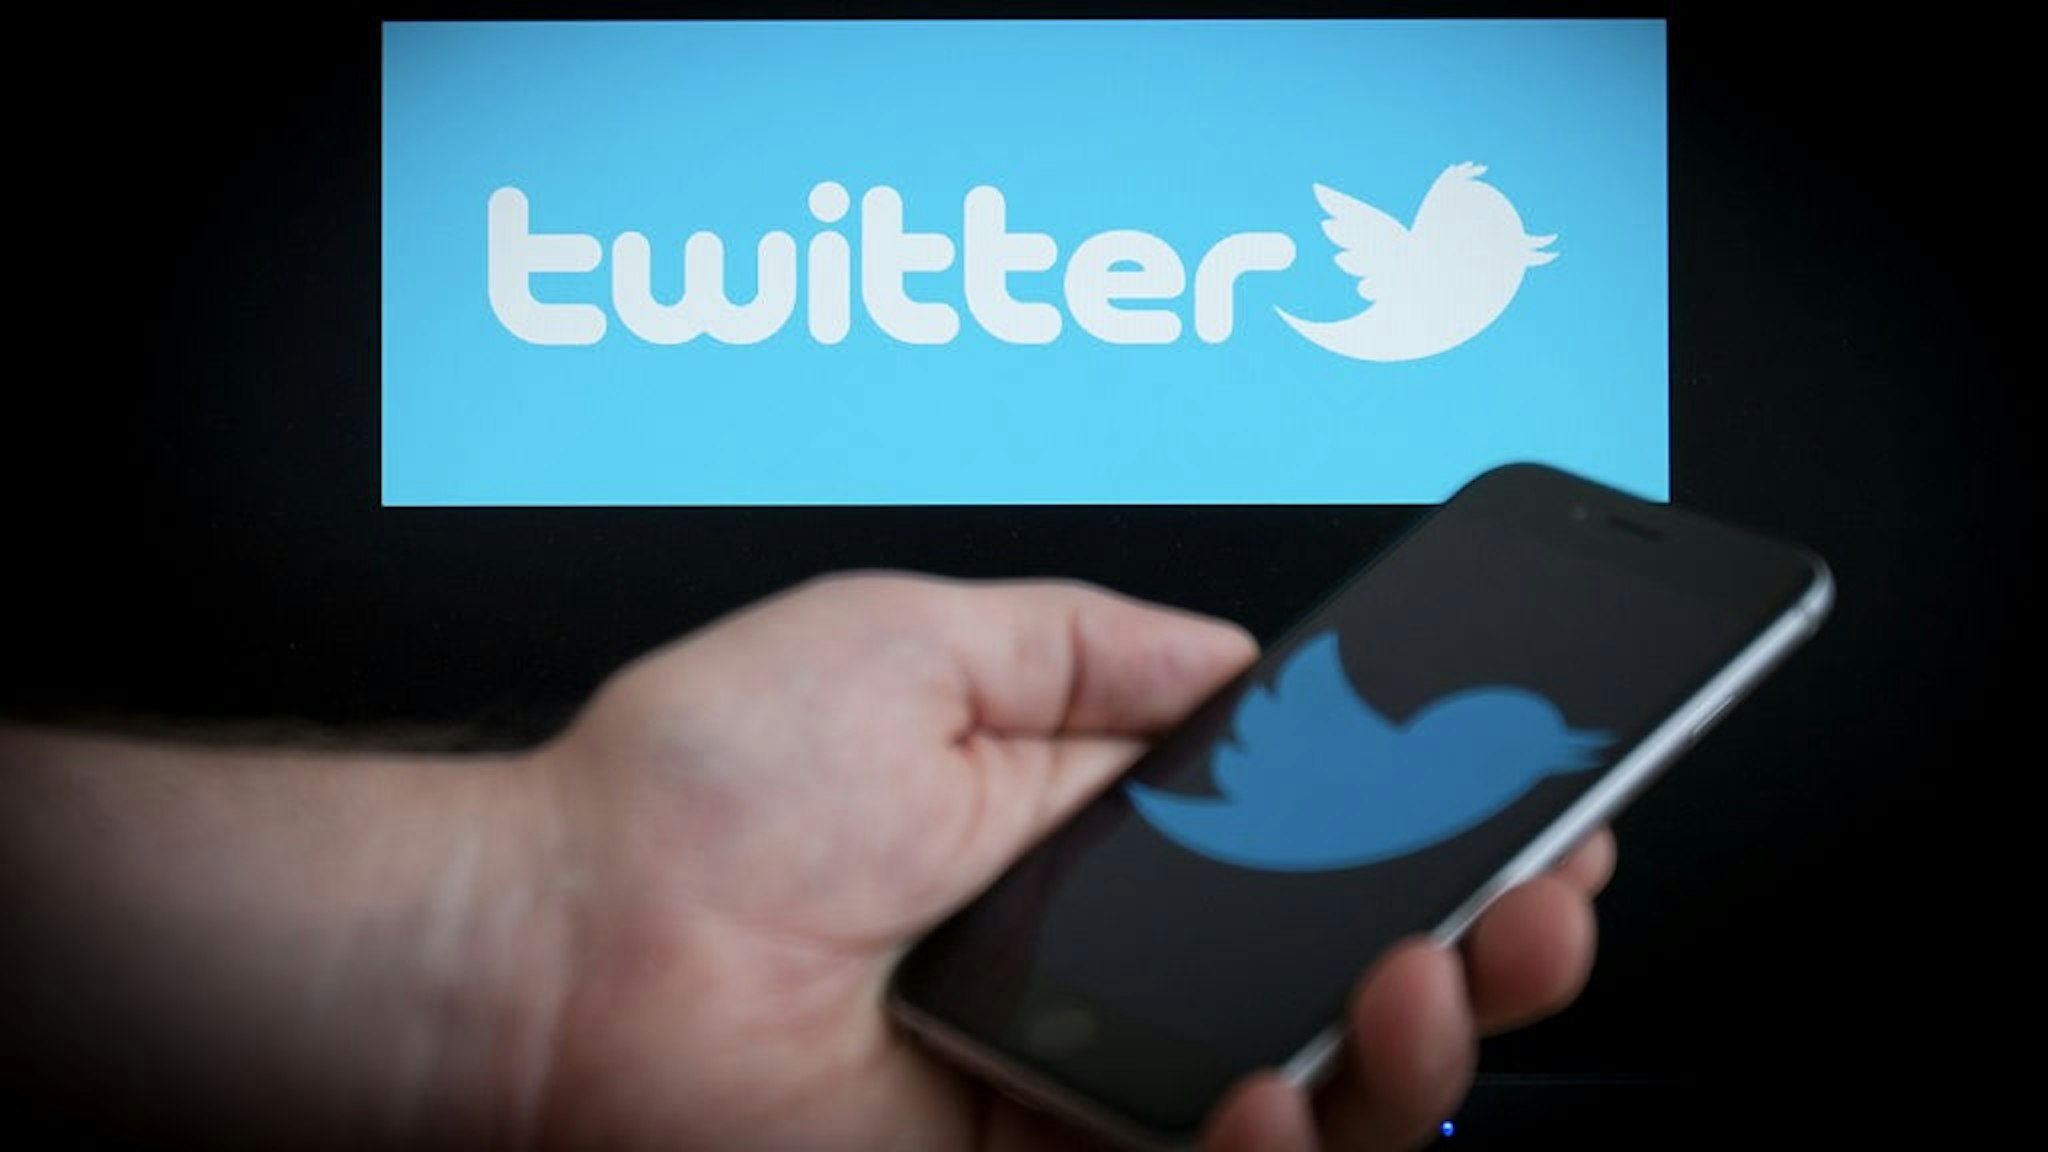 According to a source from Bloomberg news Twitter will soon allow an expansion of it’s 140 character limit. At the moment 23 character spaces are taken up by links and photos. In March Twitter CEO Jack Dorsey claimed there would be no change so as to keep the brevity of the moment of a tweet. (Photo by Jaap Arriens/NurPhoto)